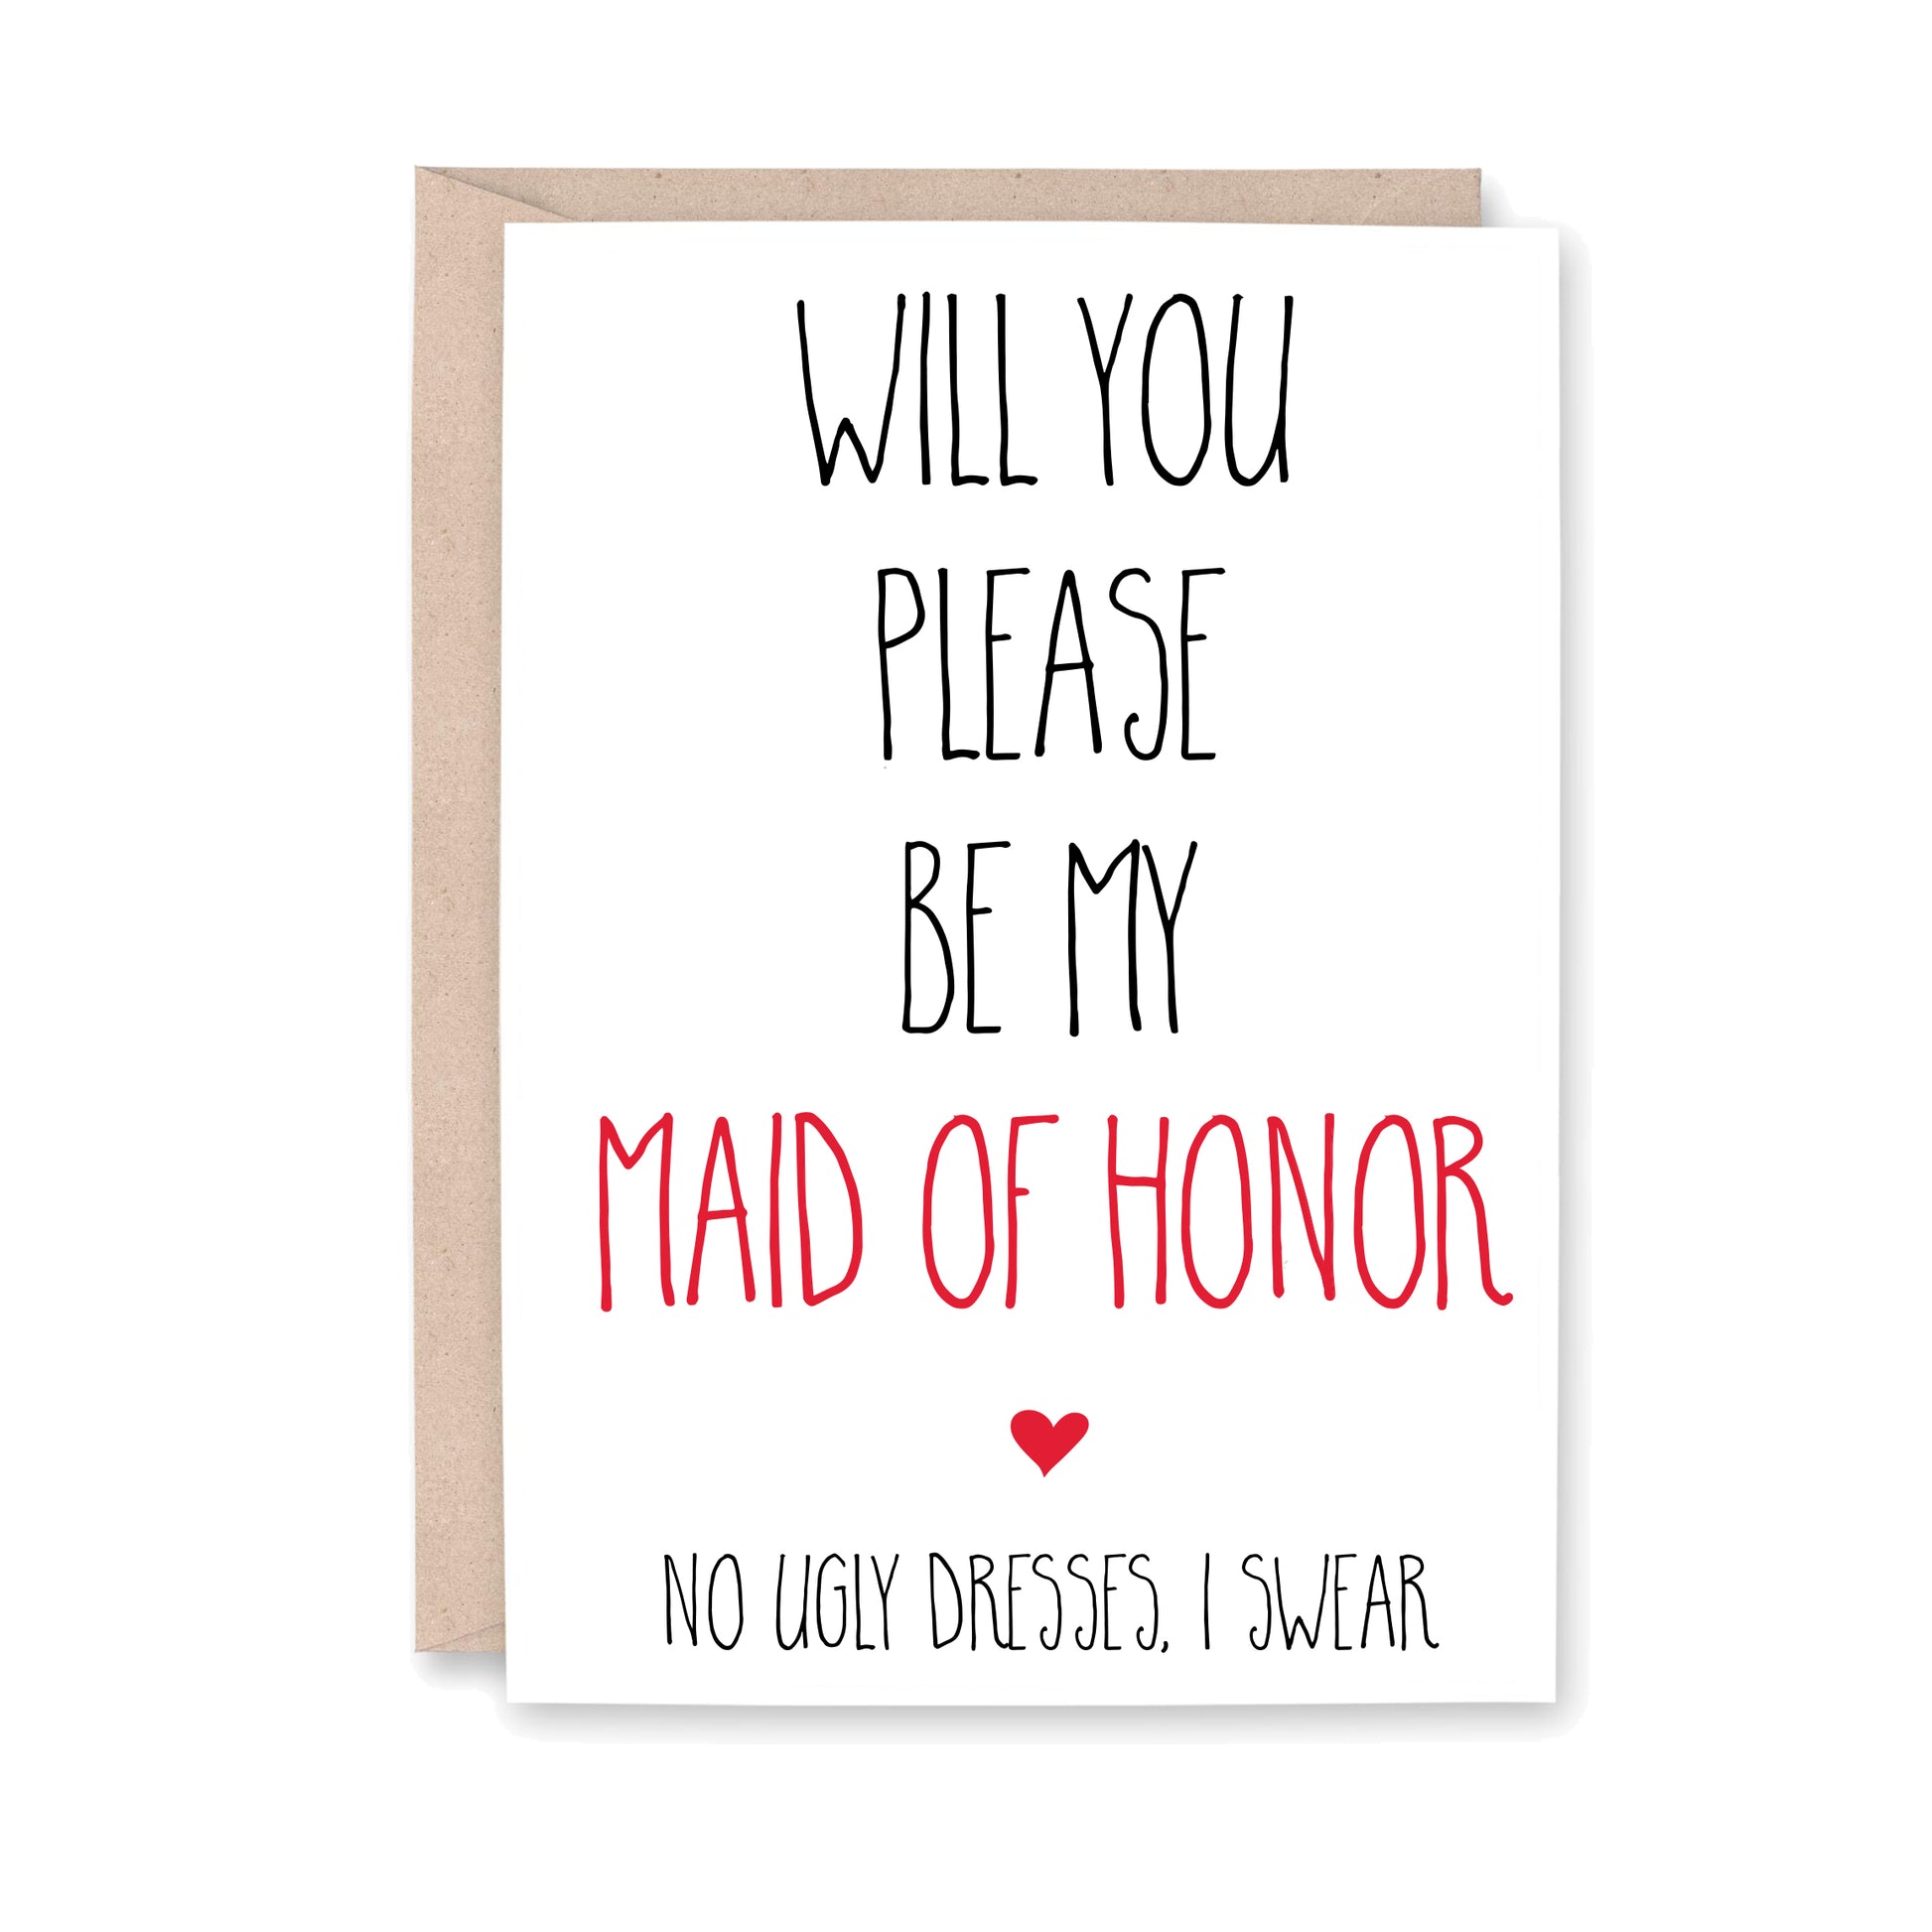 Will you please by my Maid of Honor? No ugly dresses, I swear